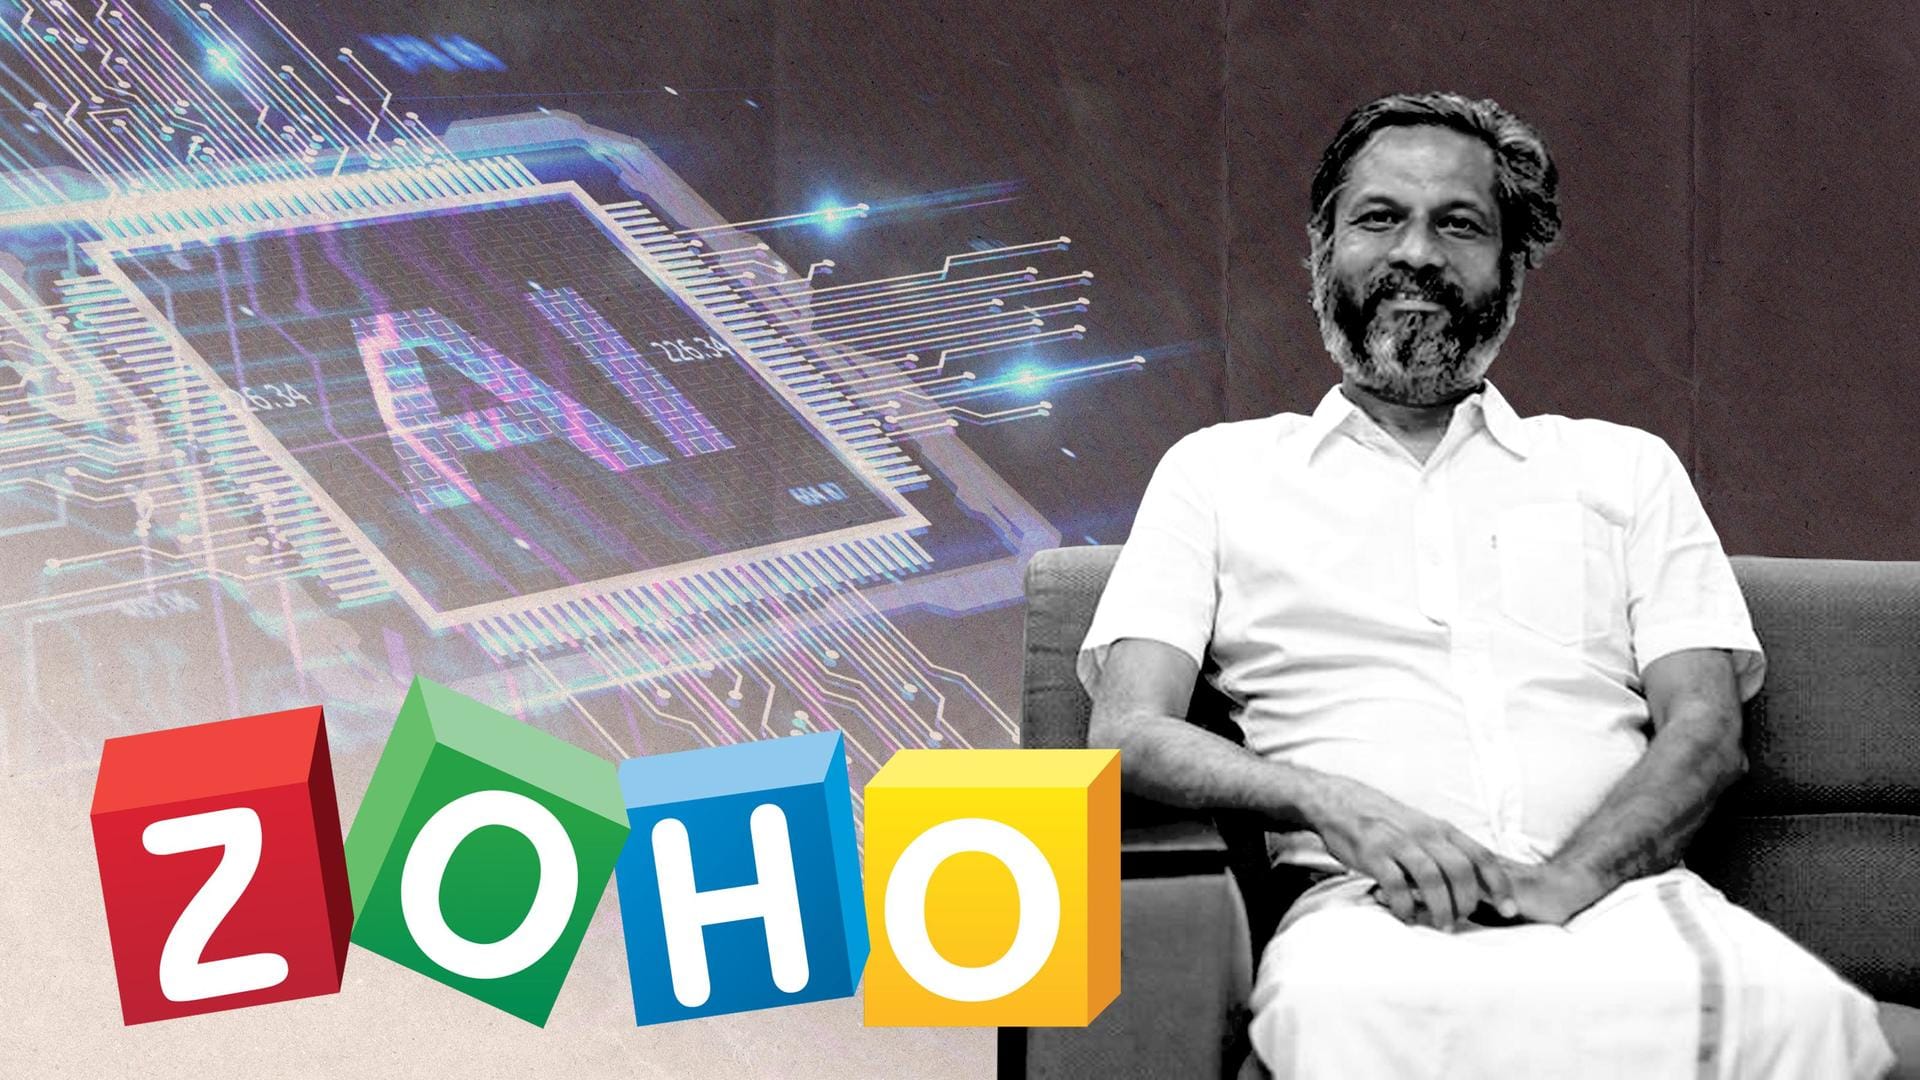 Zoho's Foray into AI: Sridhar Vembu Leads New Model to Compete with OpenAI and Google